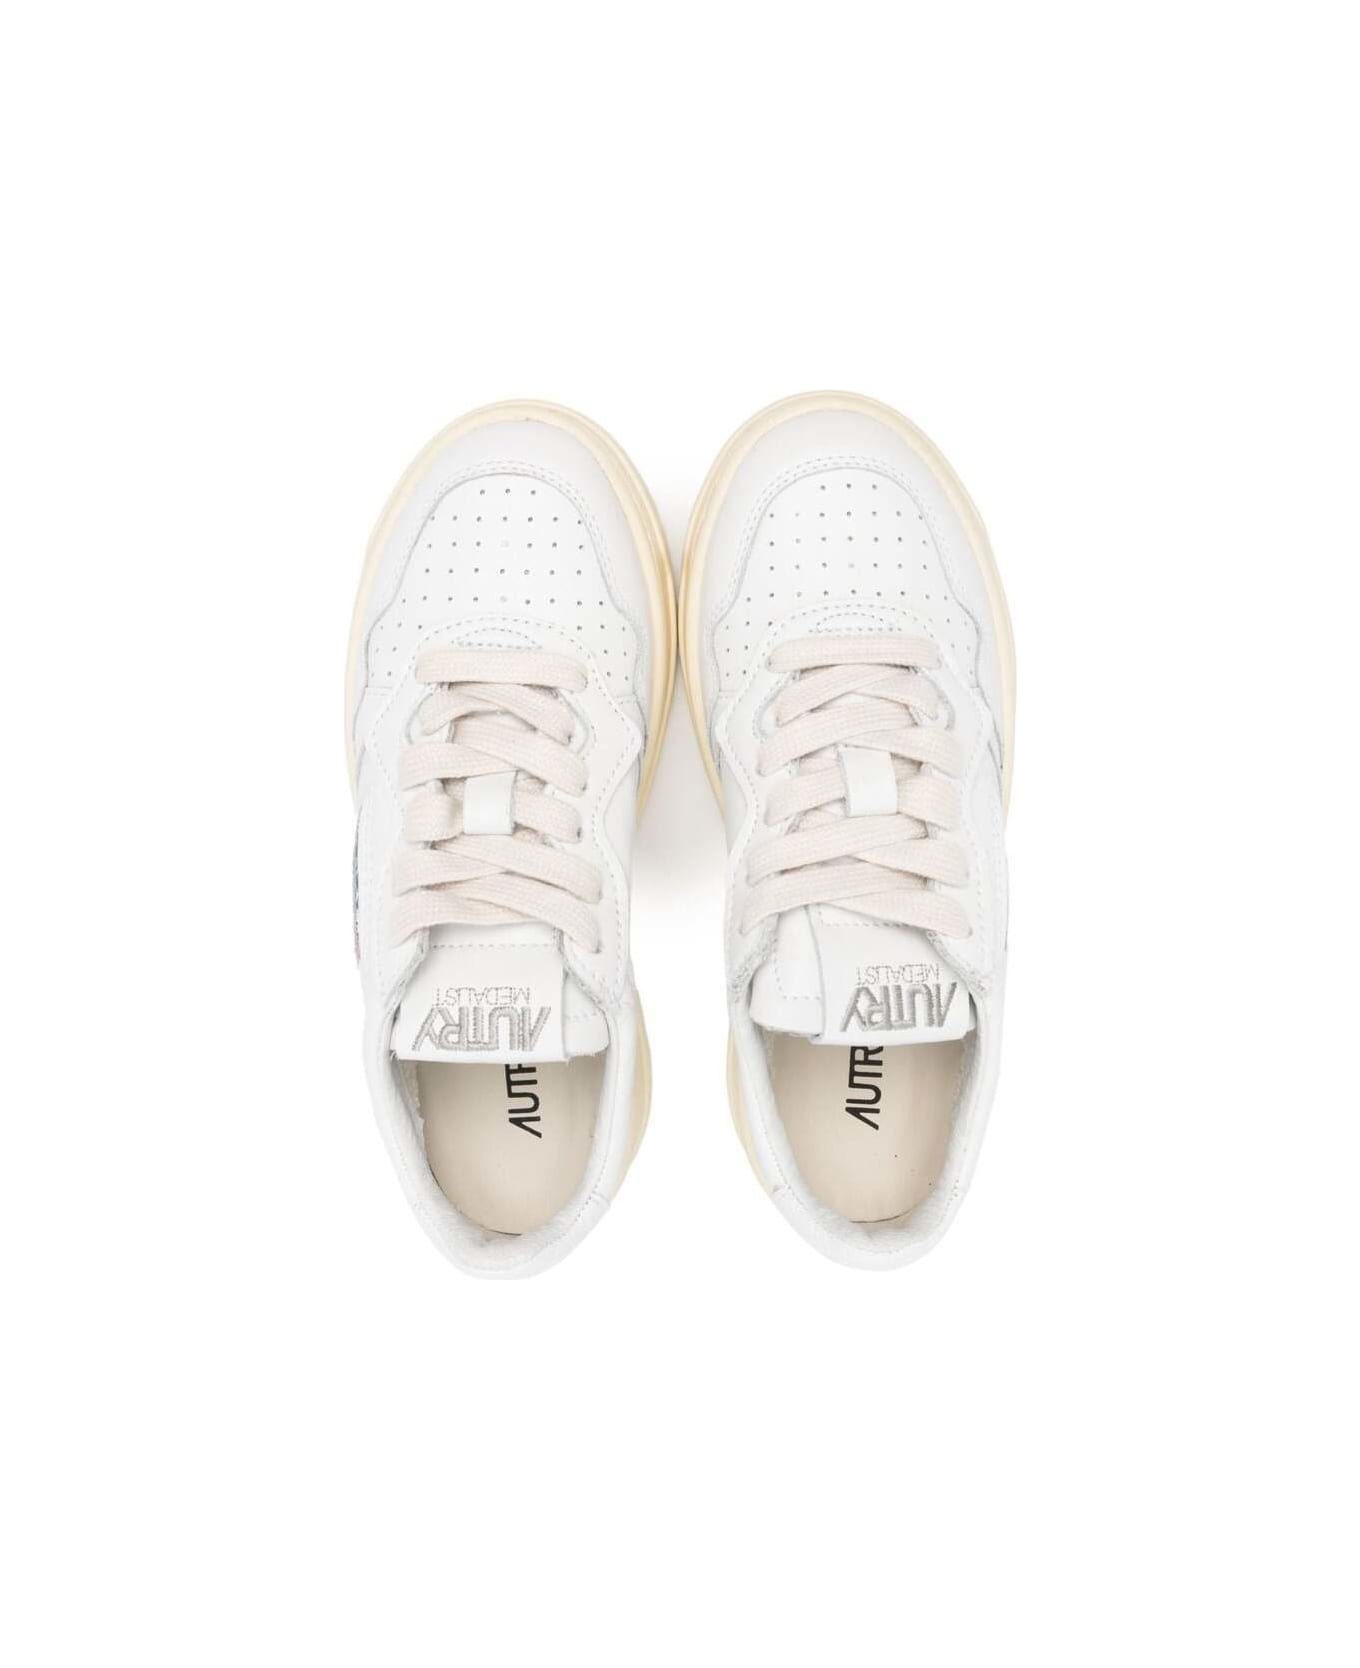 Autry White 'medalist' Low Top Sneakers In Cow Leather Boy - White